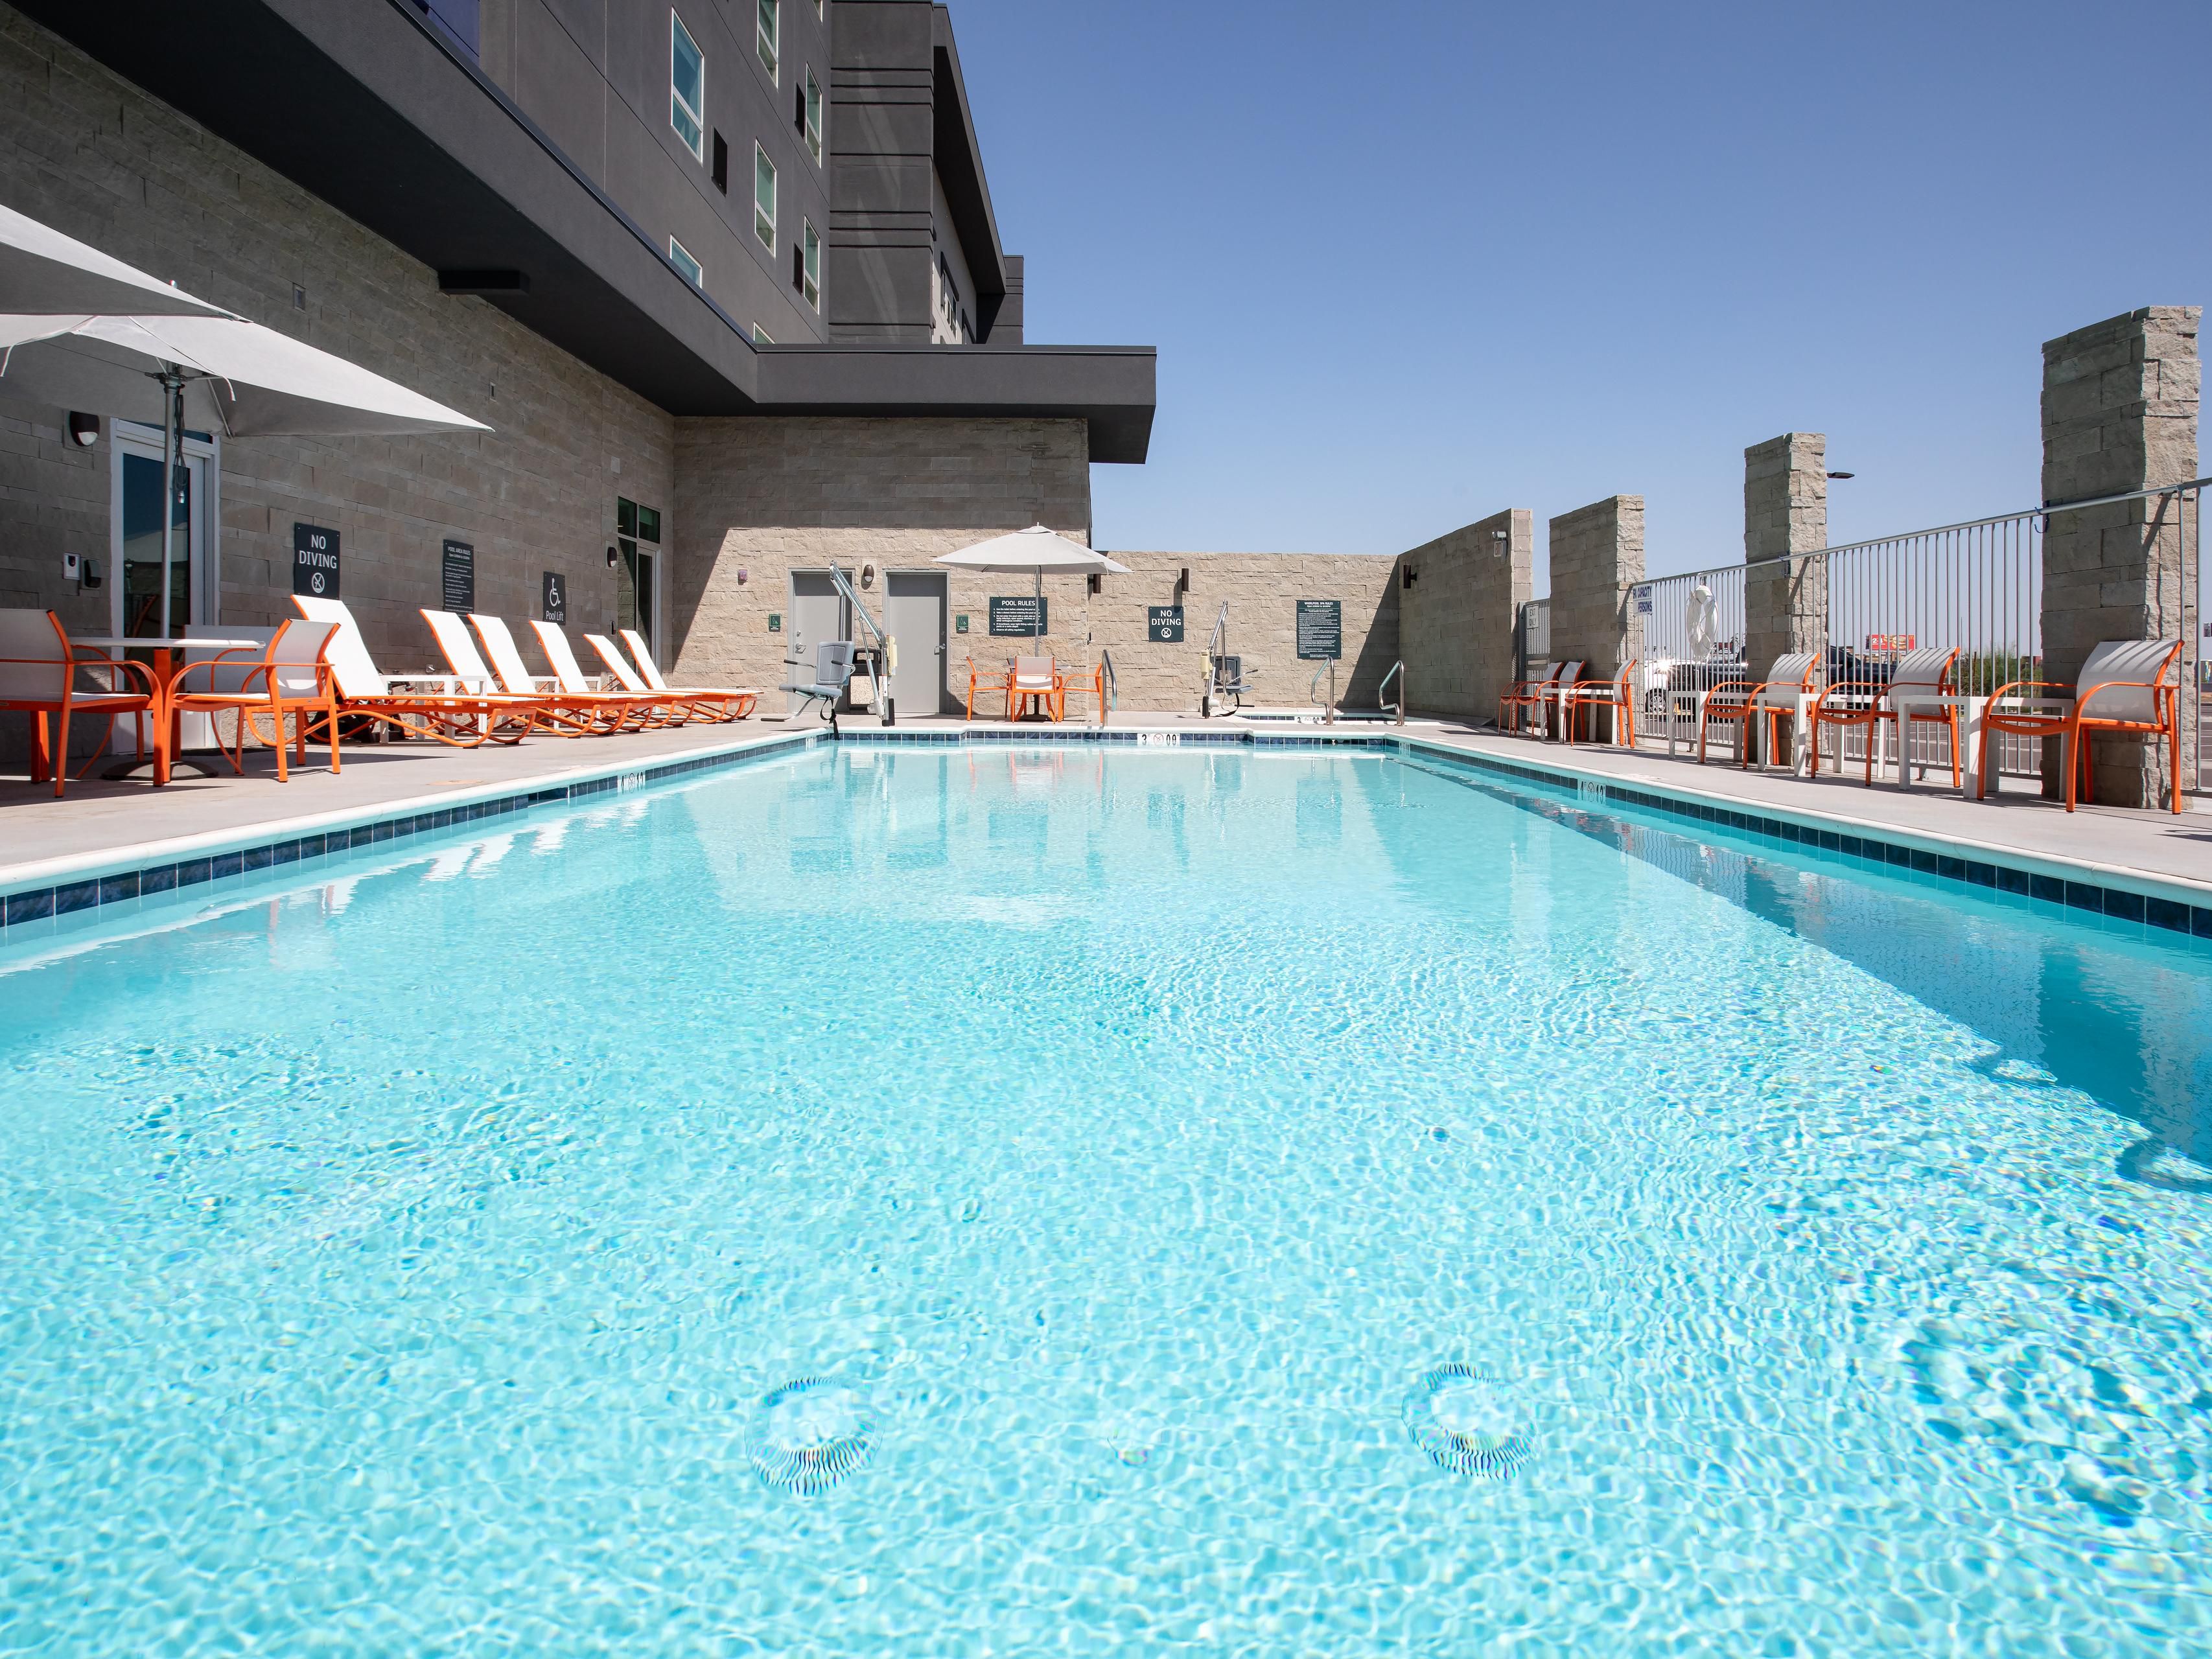 Enjoy our relaxing outdoor pool all year round.  Whether working on your tan, or you just want to soak up some sun while reading a book, this is the perfect place for you!